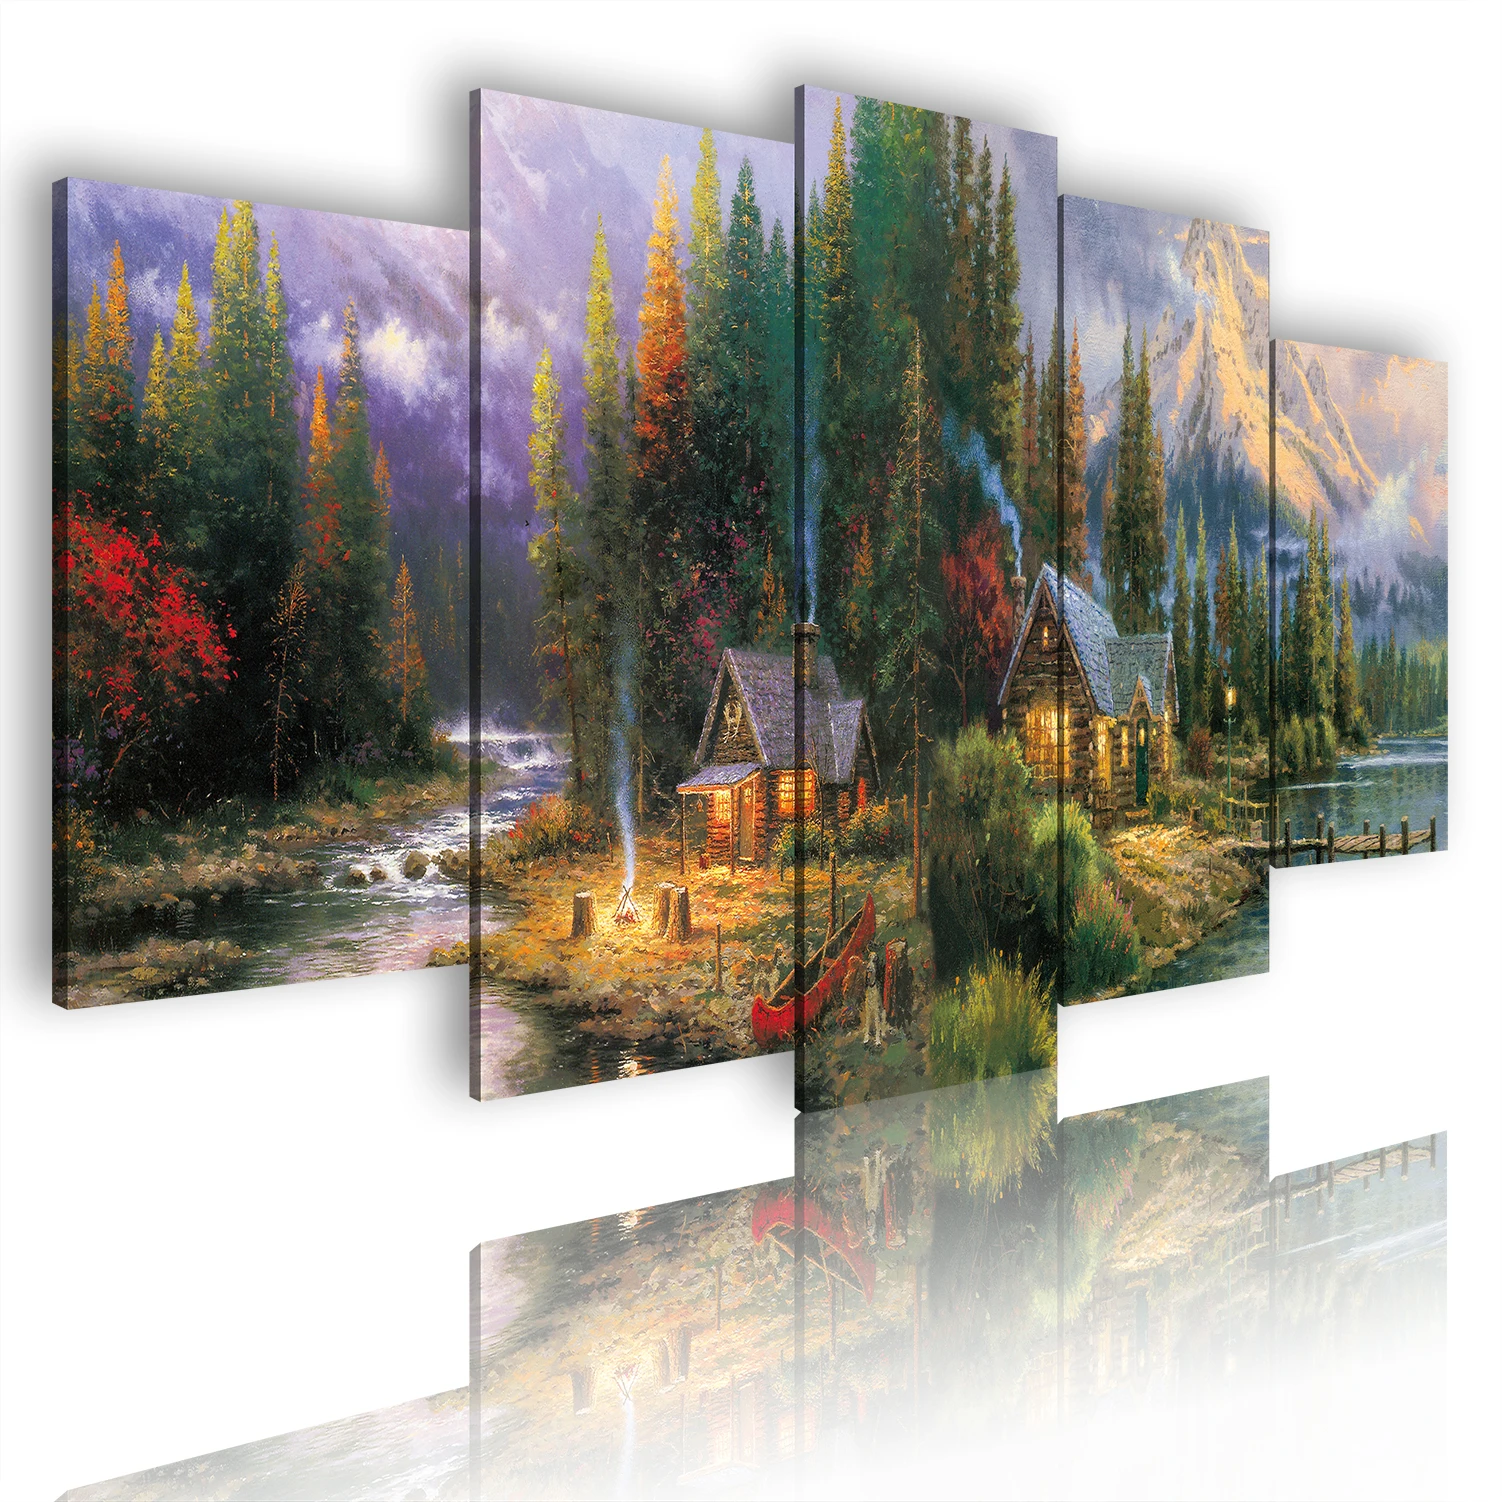 

Mosaic Modern Framed Wall Abstract Quality Oil Painting Living Room Artwork Picture Beauty Scenery Canvas Art